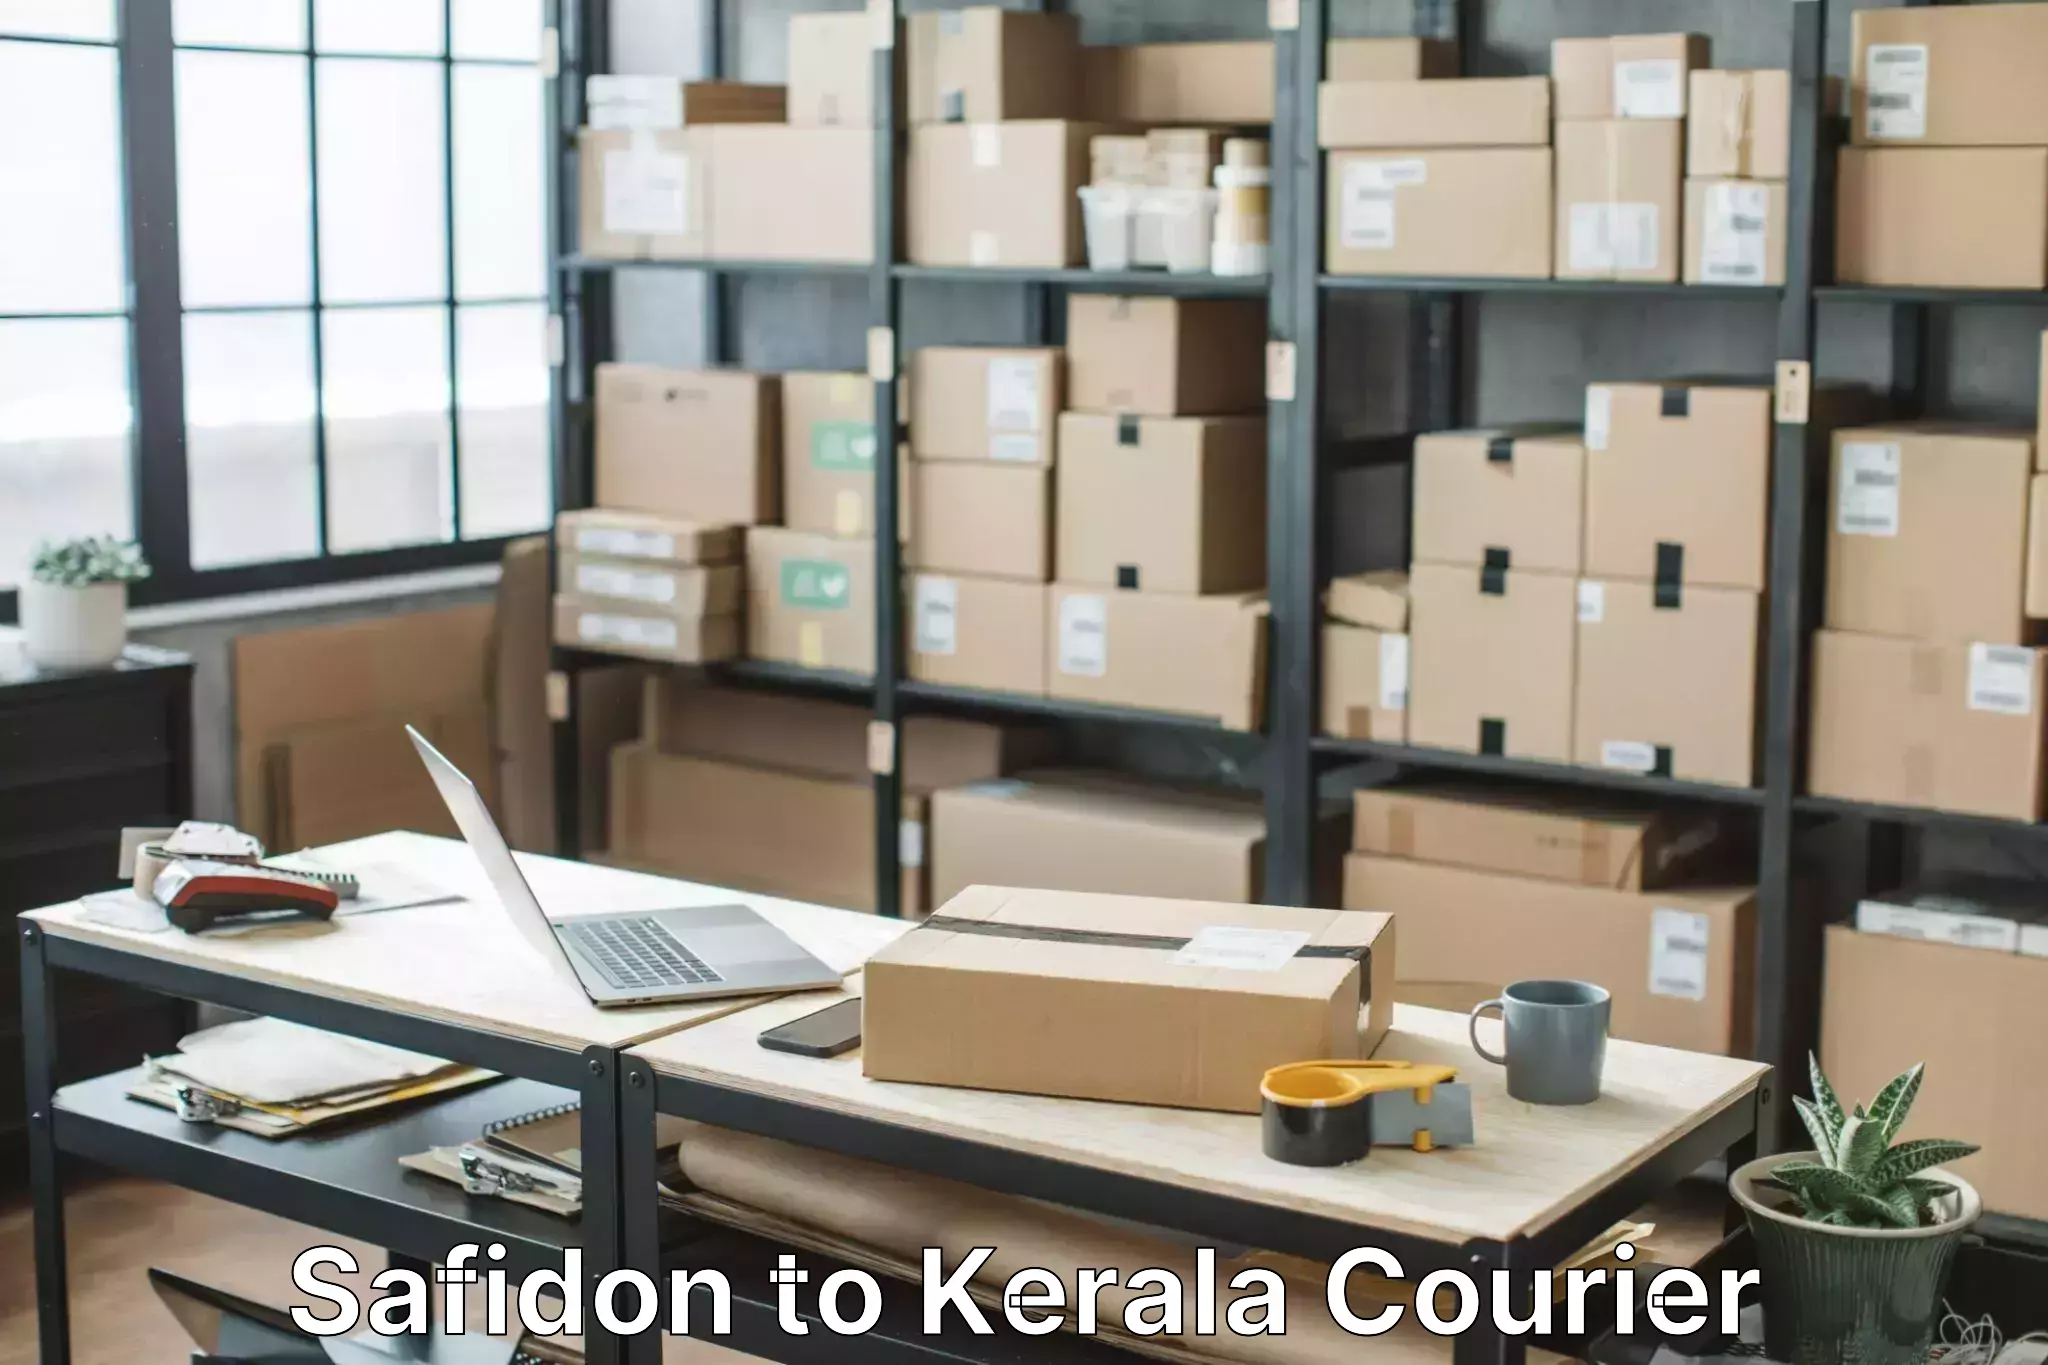 Furniture delivery service Safidon to Cochin University of Science and Technology